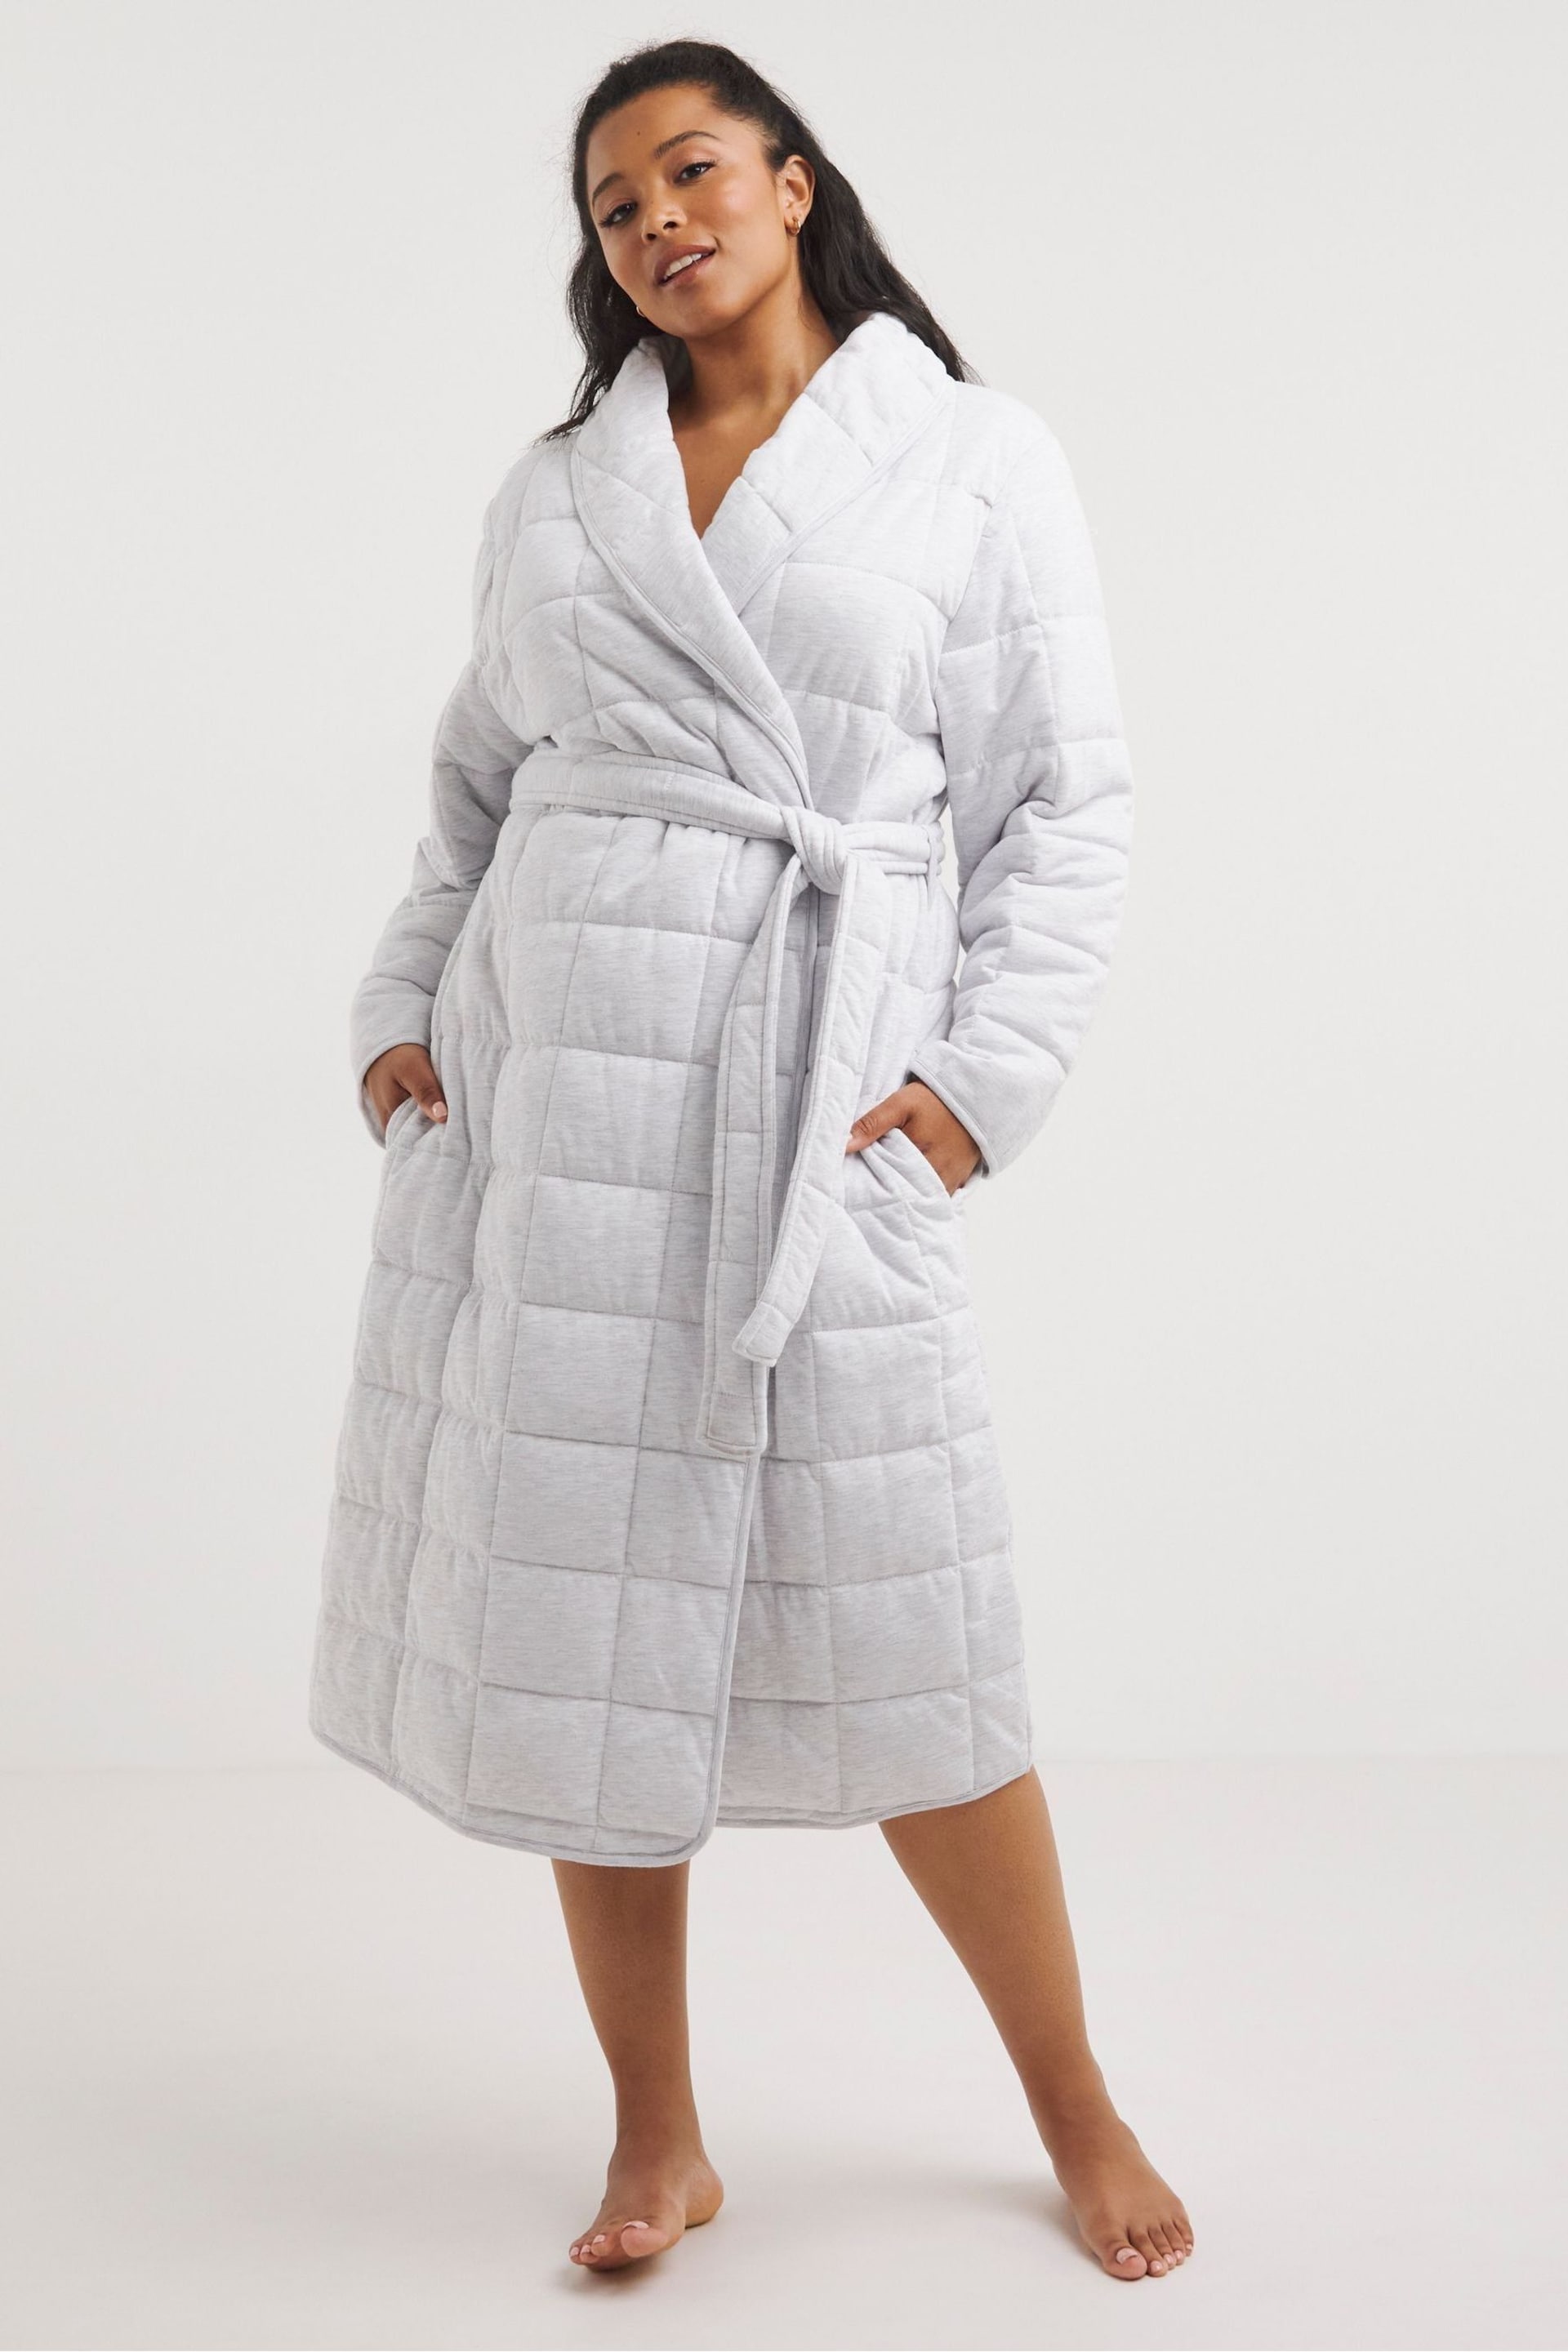 Figleaves Grey Luxury Quilted Long Dressing Gown - Image 1 of 4